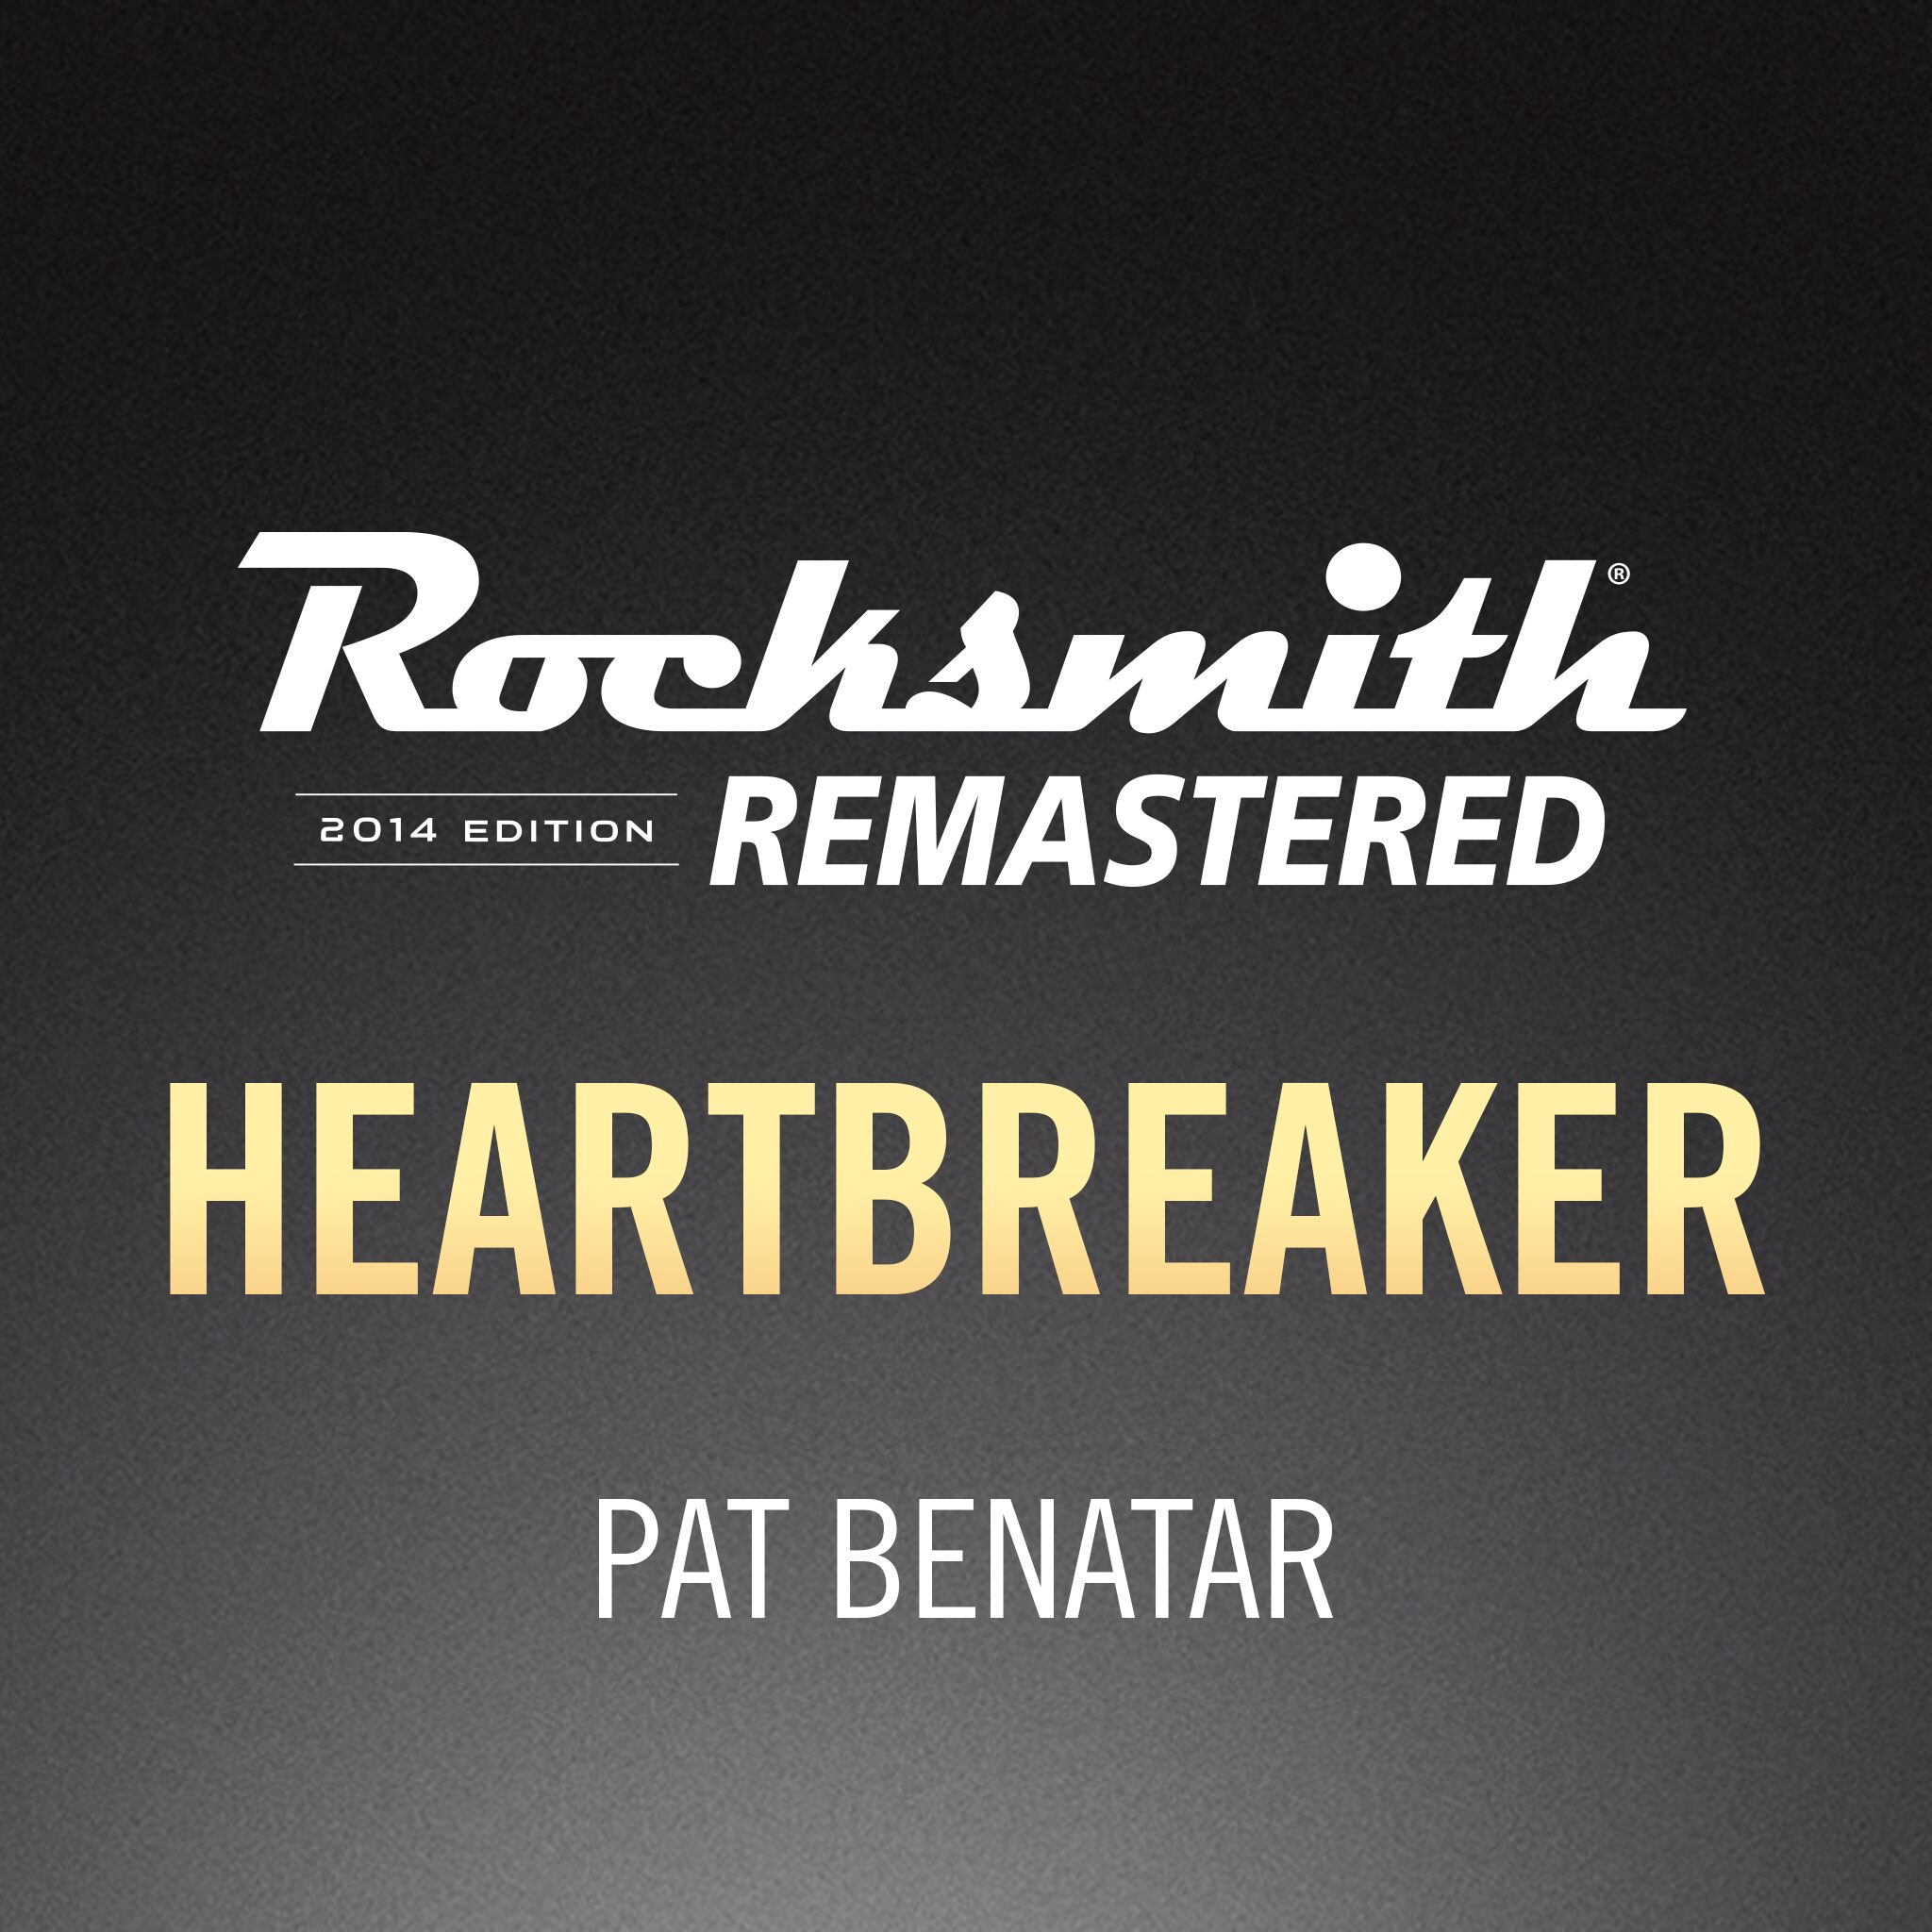 Pat benatar heartbreaker. Heartbreaker (Pat Benatar Song).